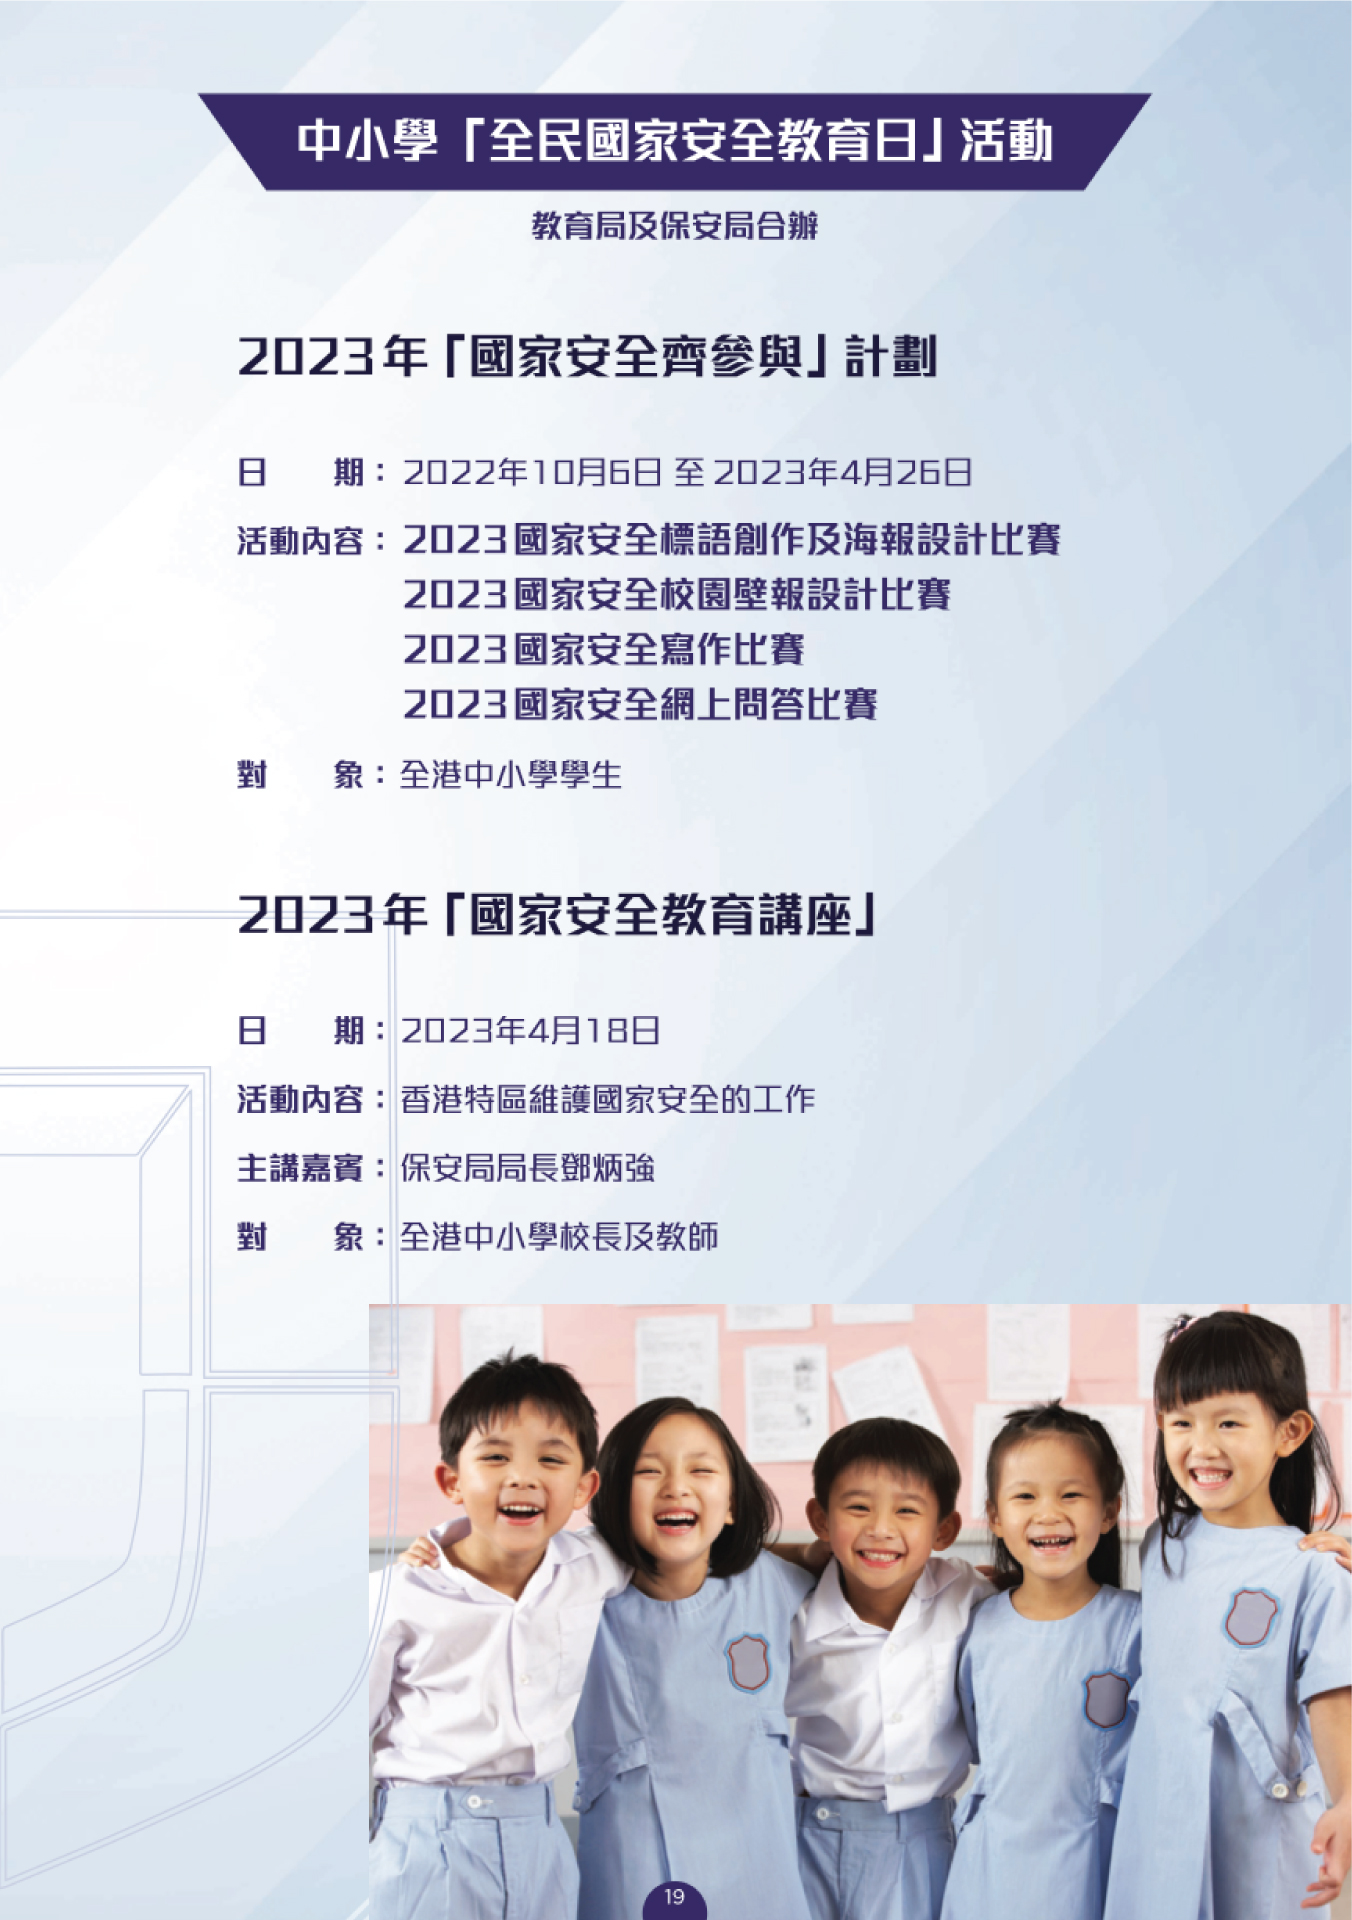 Activities of Primary and Secondary Schools on National Security Education Day (Chinese only)